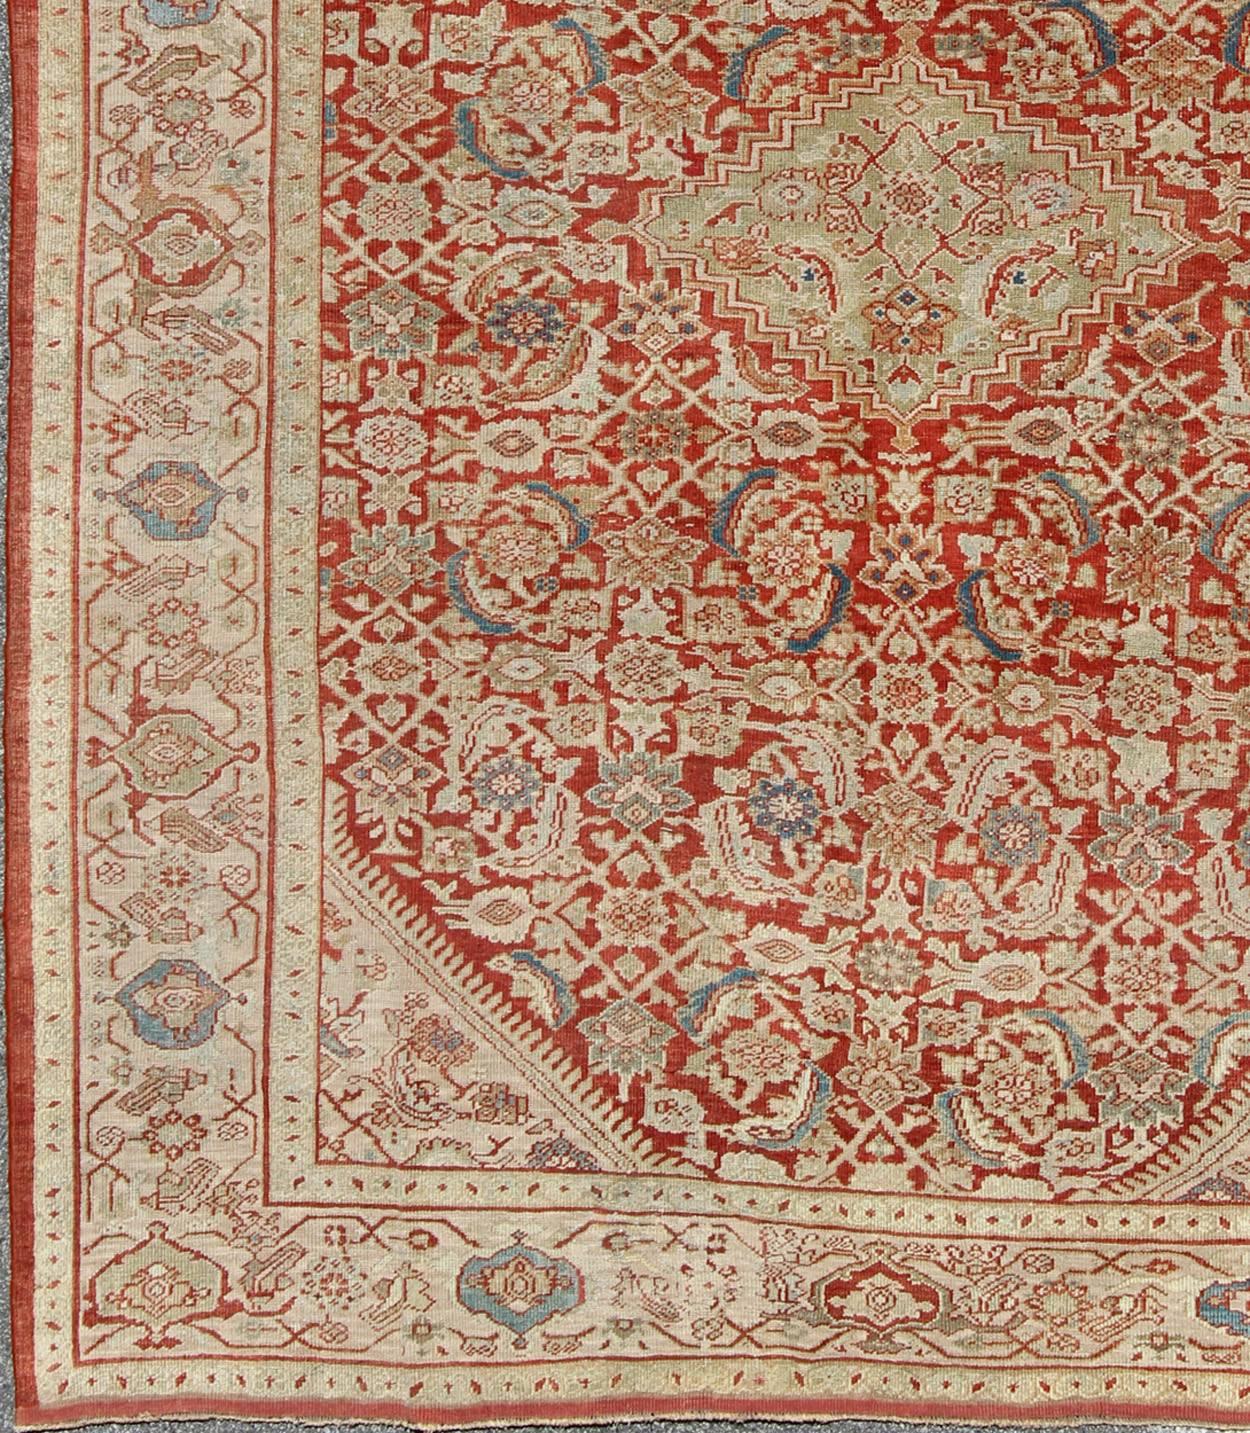 Antique Persian Sultanabad rug with Herati design in red, green, blue and cream, Keivan Woven Arts / rug / F-0910. Antique Persian Sultanabad.

This antique Persian rug is a reinvention of traditional Persian pattern adapted for European interiors